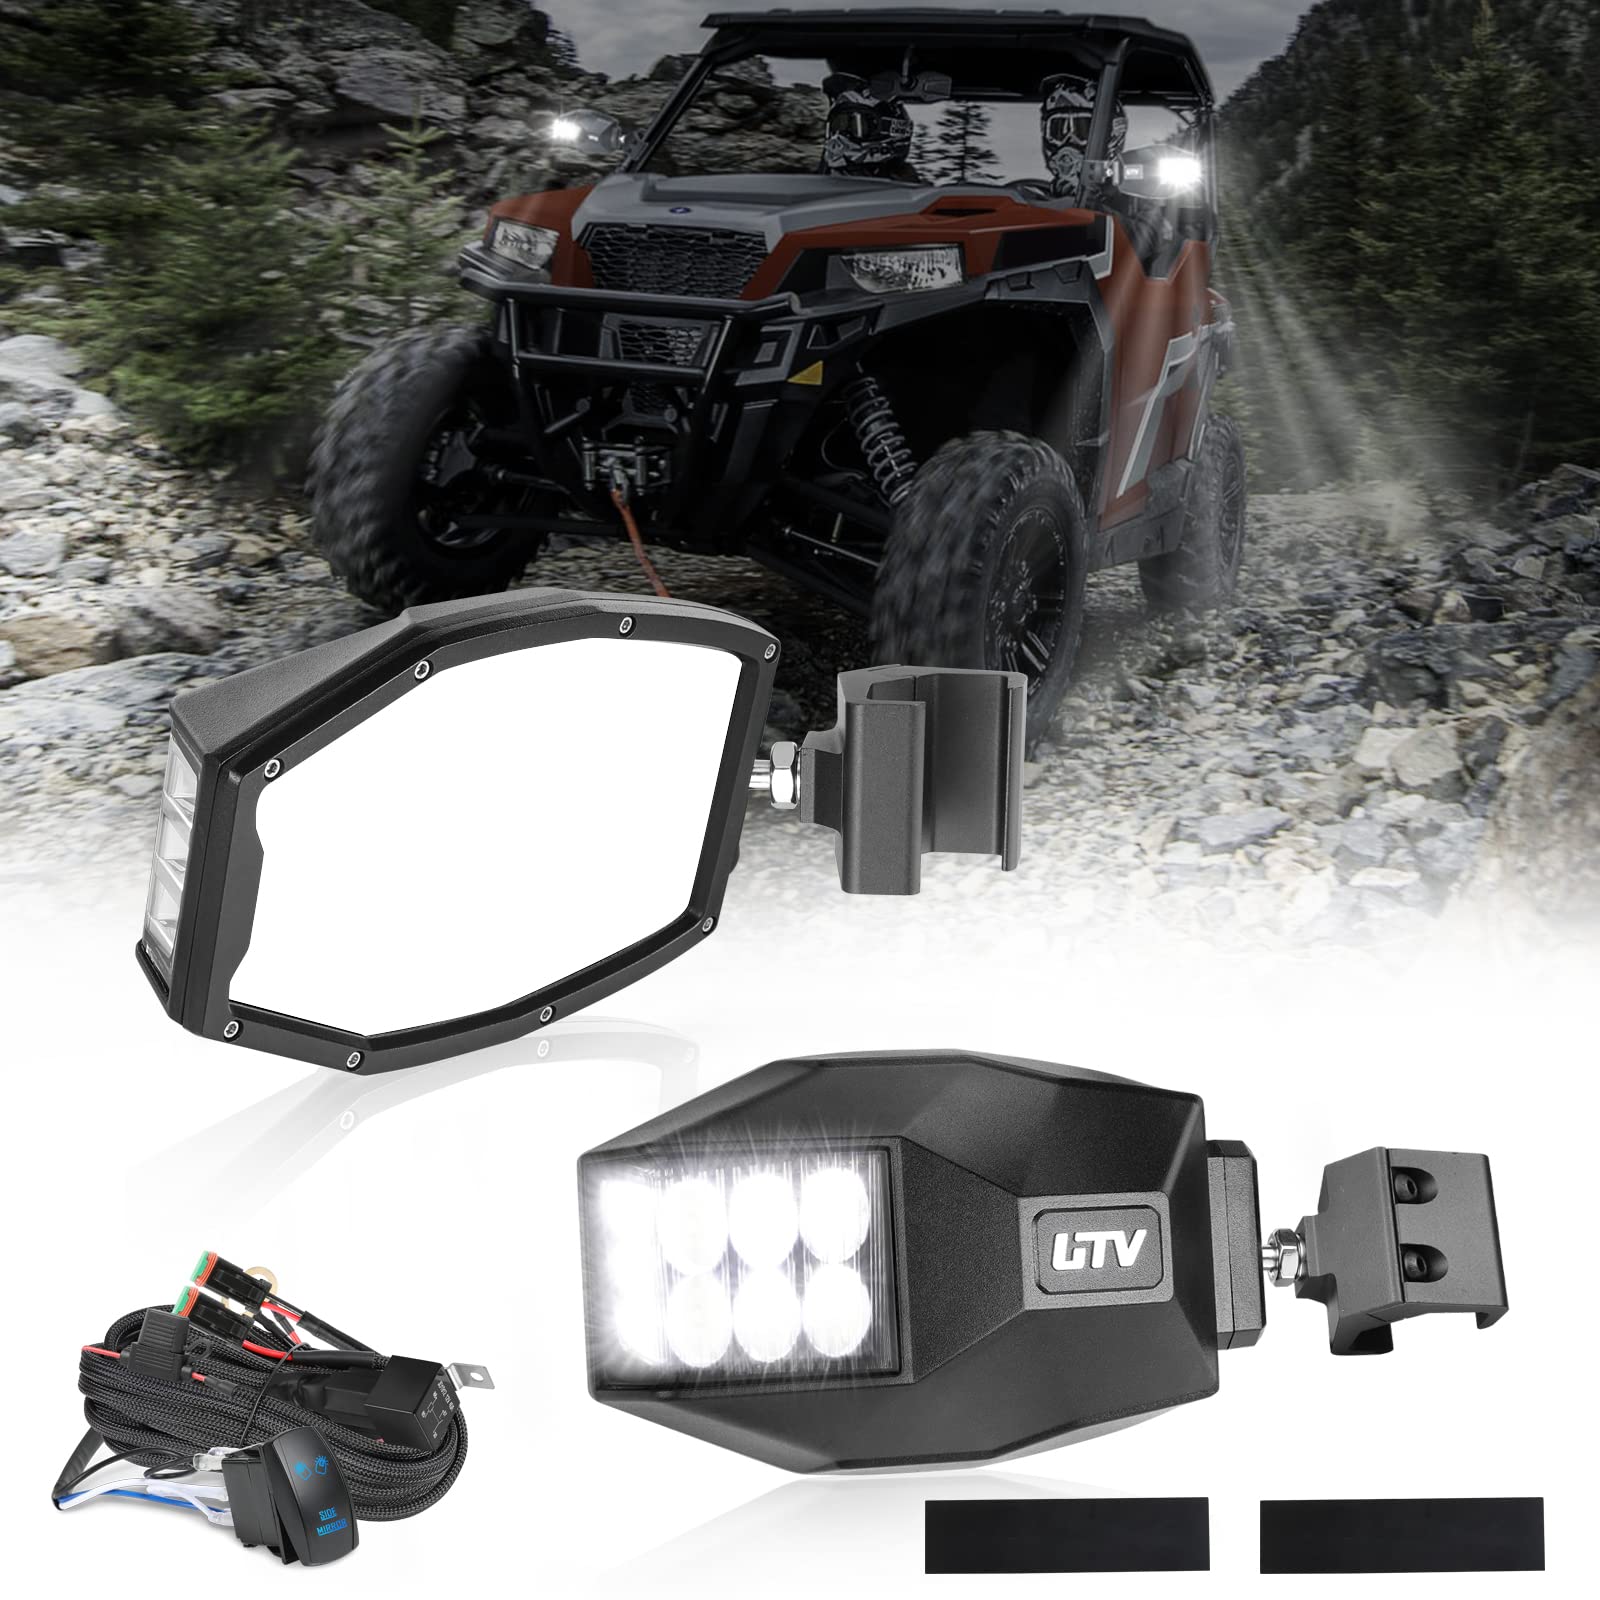 UTV Side Mirrors ACEC SHOP Pro-Fit Side Mirrors Polaris Ranger General Rear View Mirrors with LED Light UTV Accessories Side